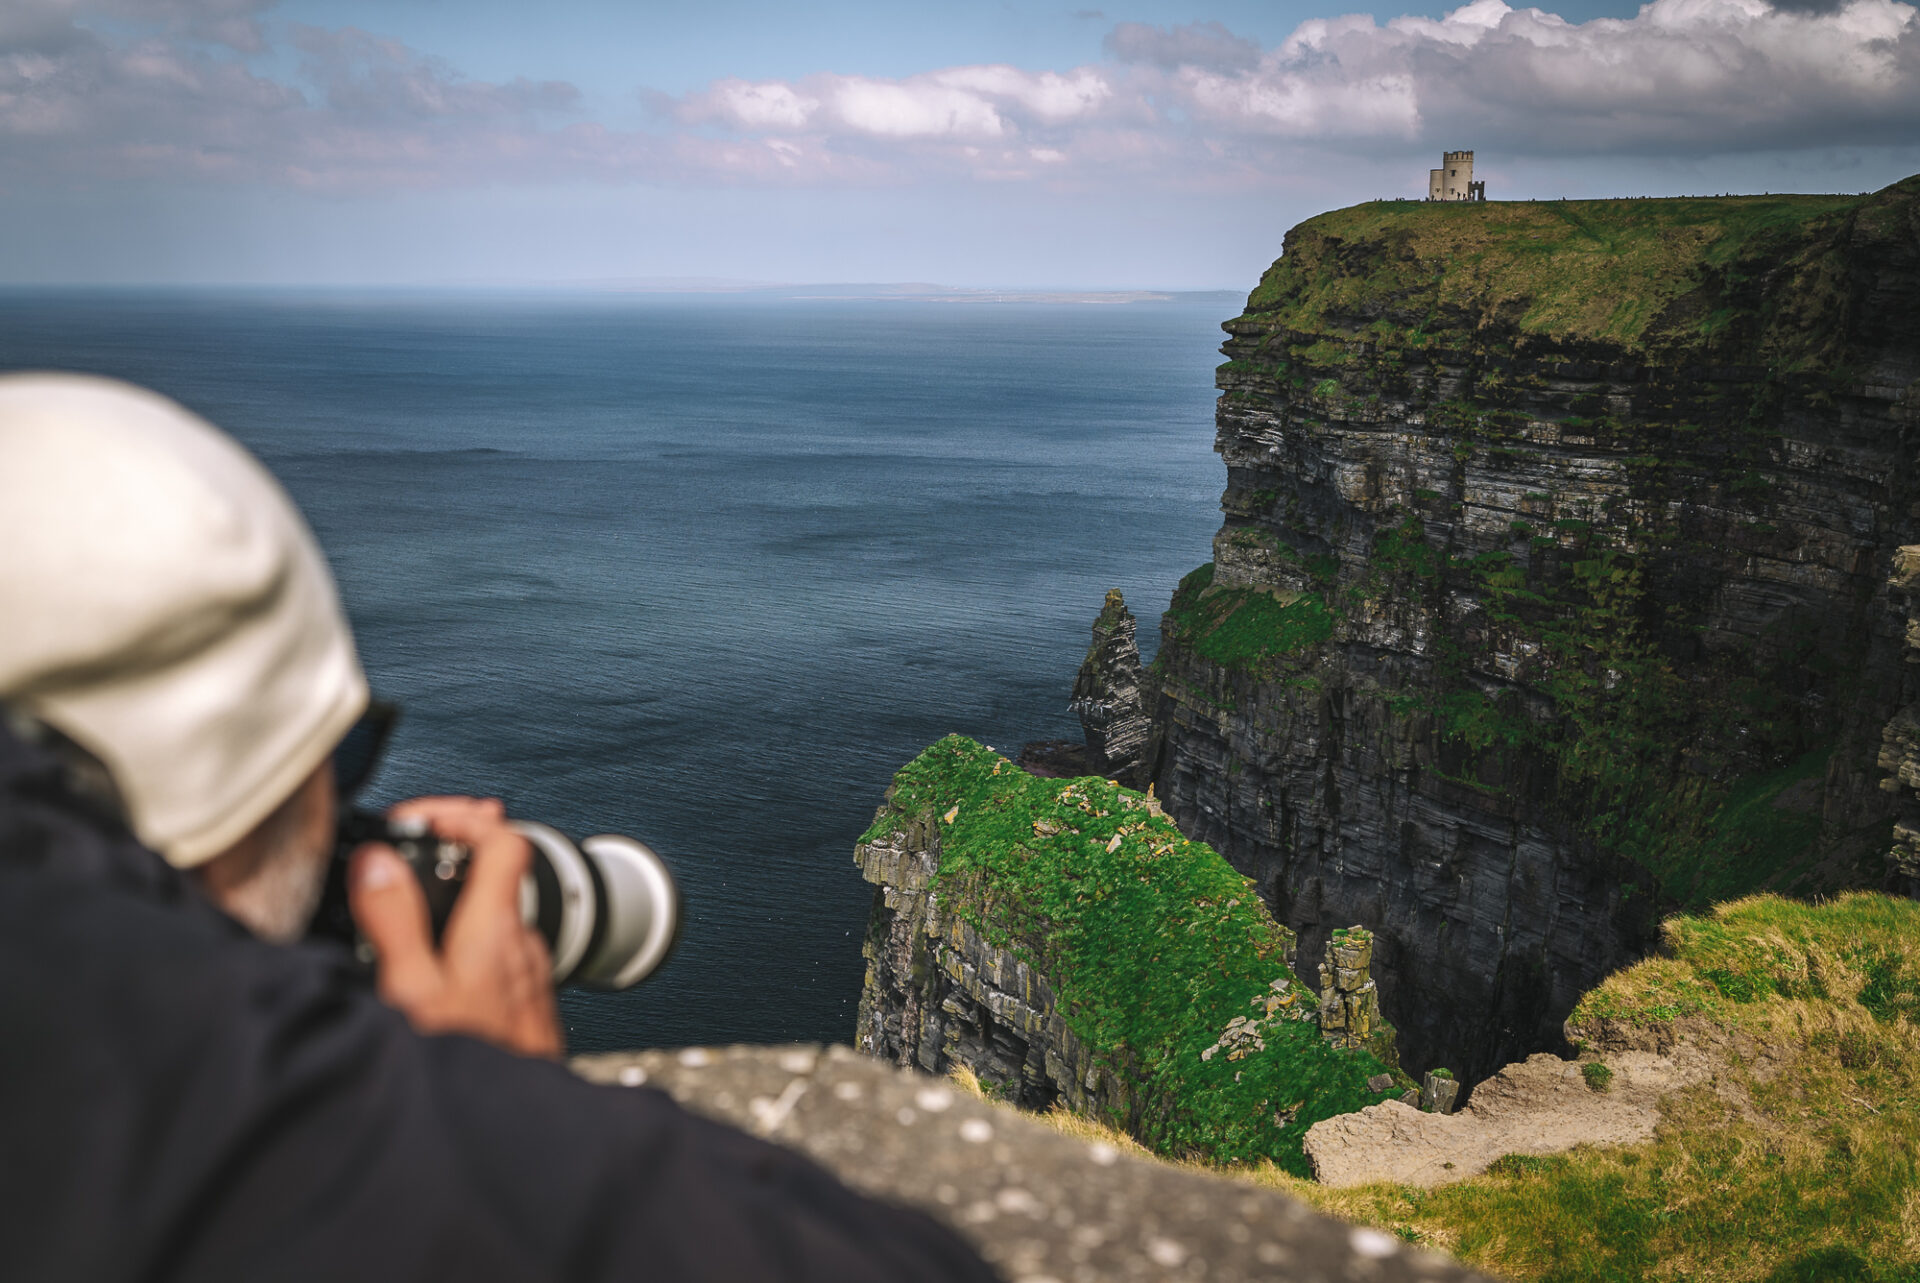 Searching for birds at the Cliffs of Moher